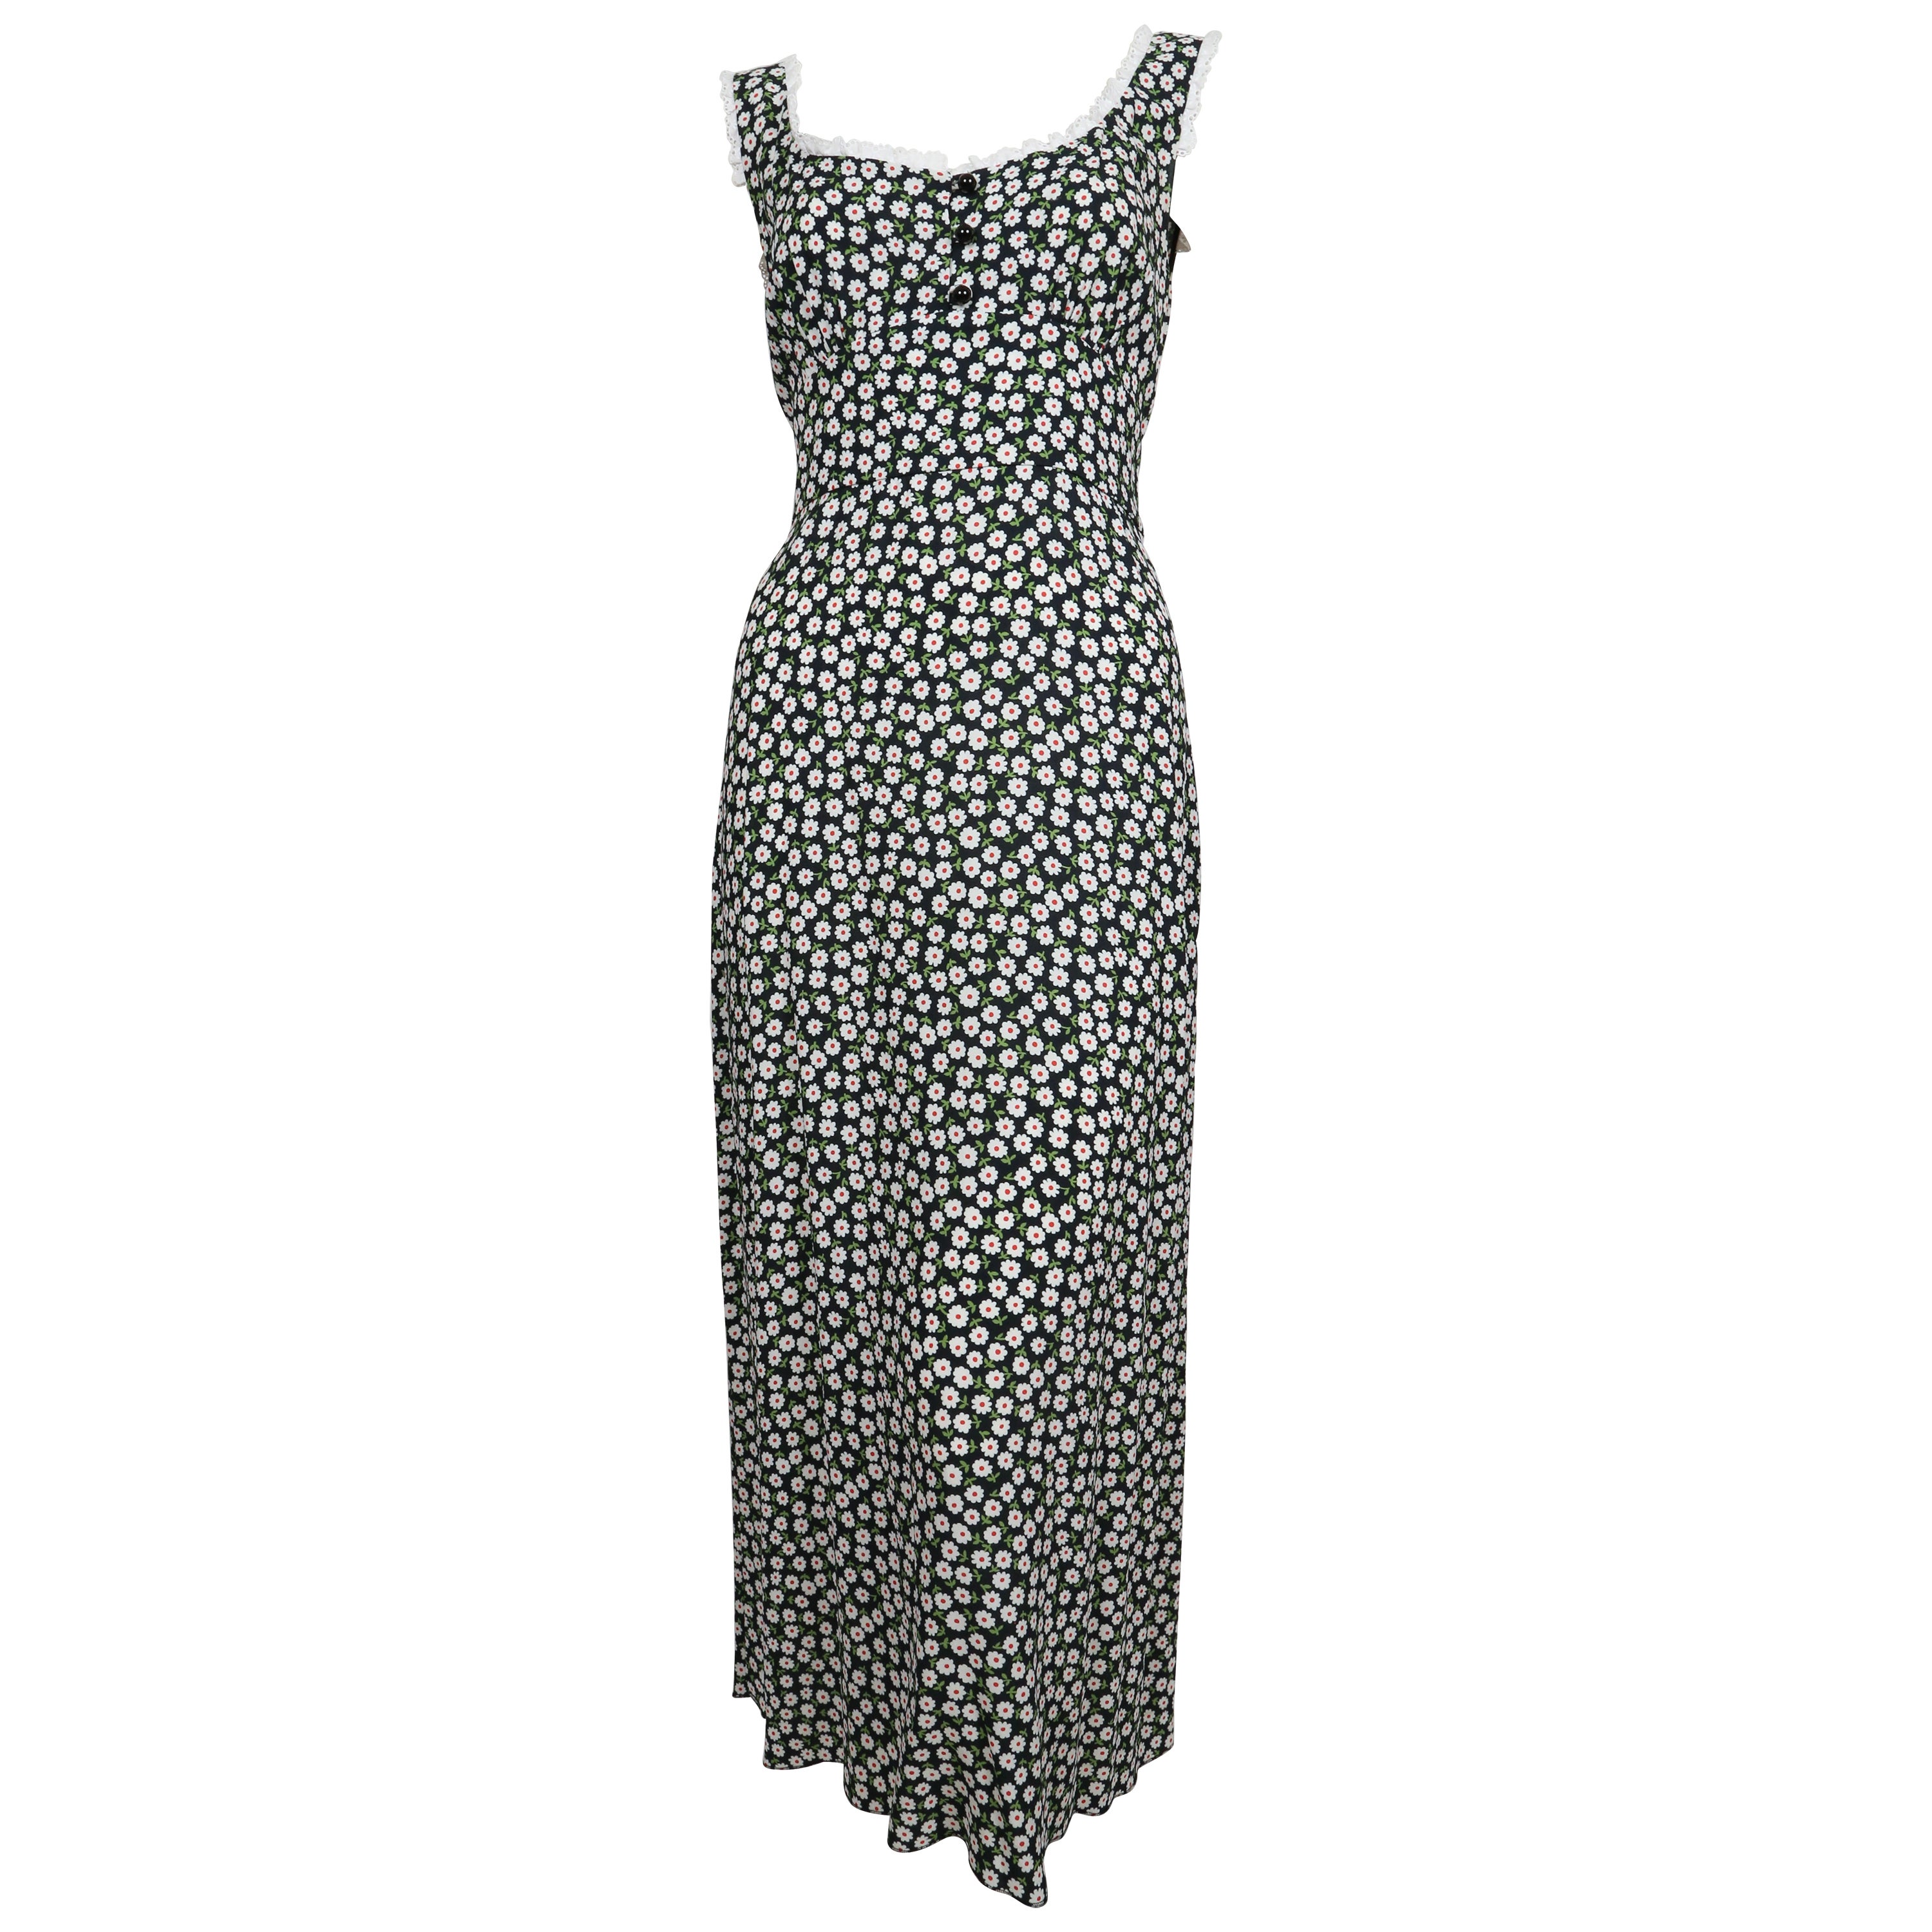 MIU MIU floral maxi dress with Broderie Anglaise lace trim For Sale